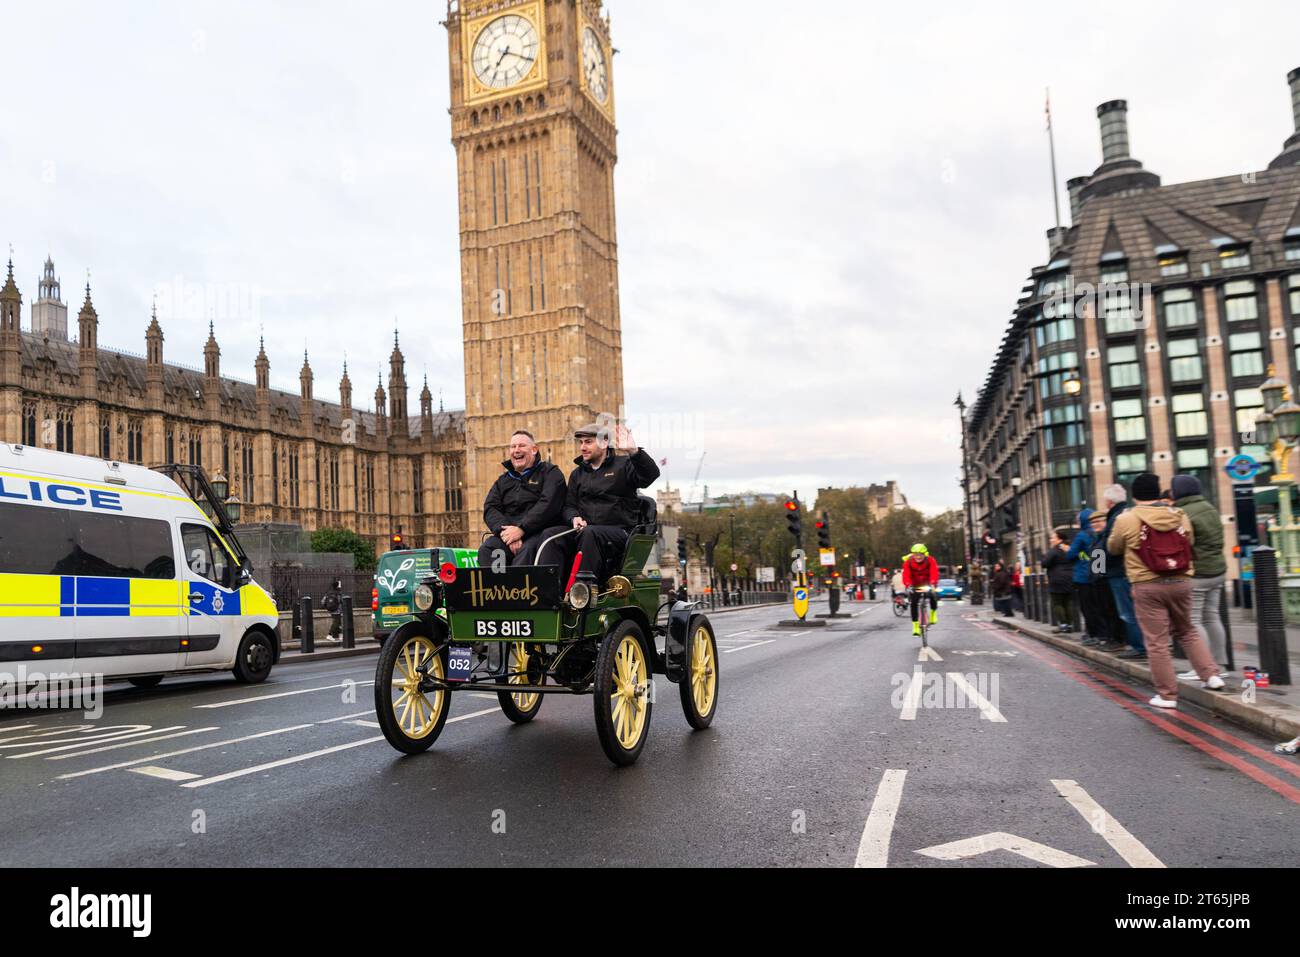 1901 Waverley electric car participating in the London to Brighton veteran car run, vintage motoring event passing through Westminster, London, UK Stock Photo